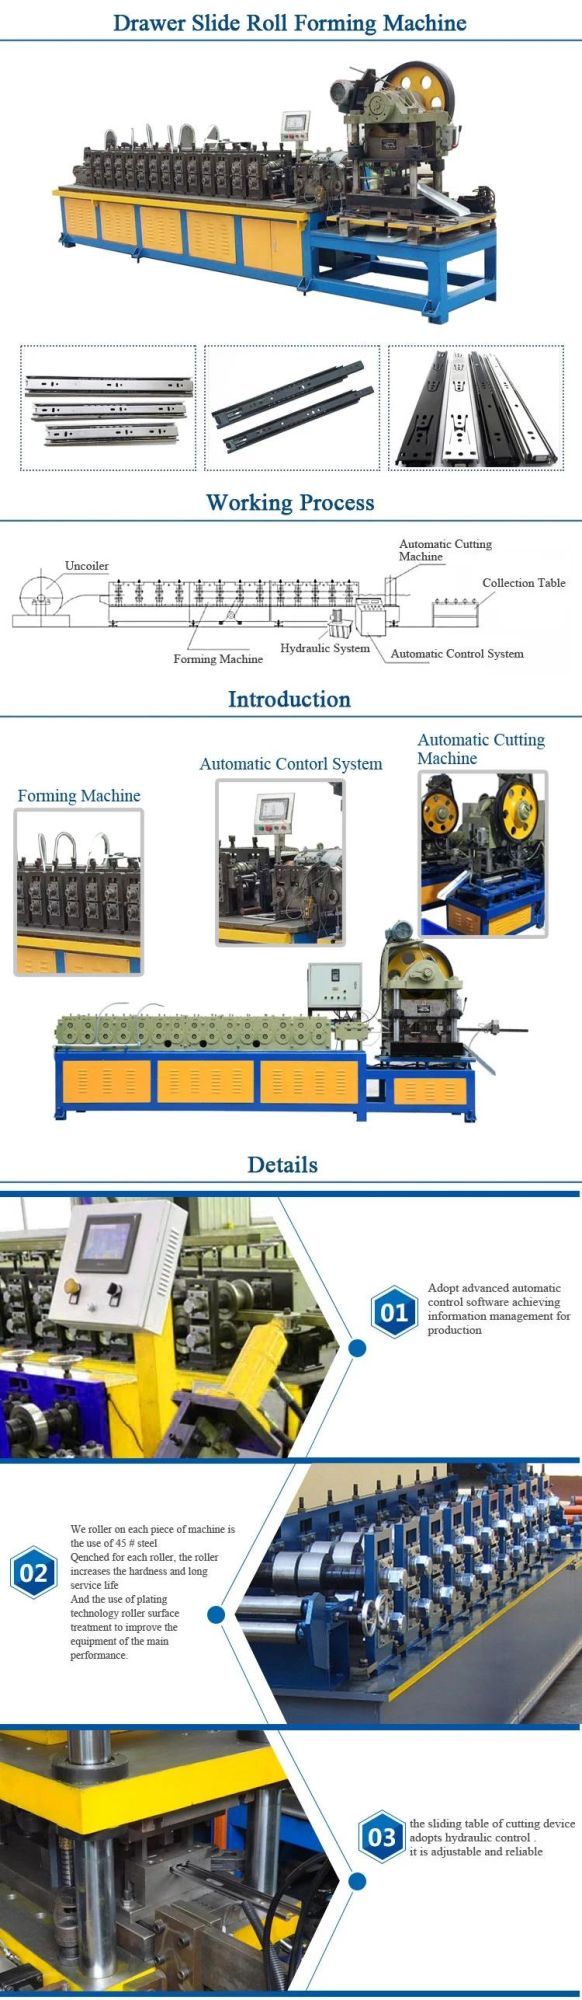 High Precision Good Supplier Drawer Slide Cold Roll Forming Machine